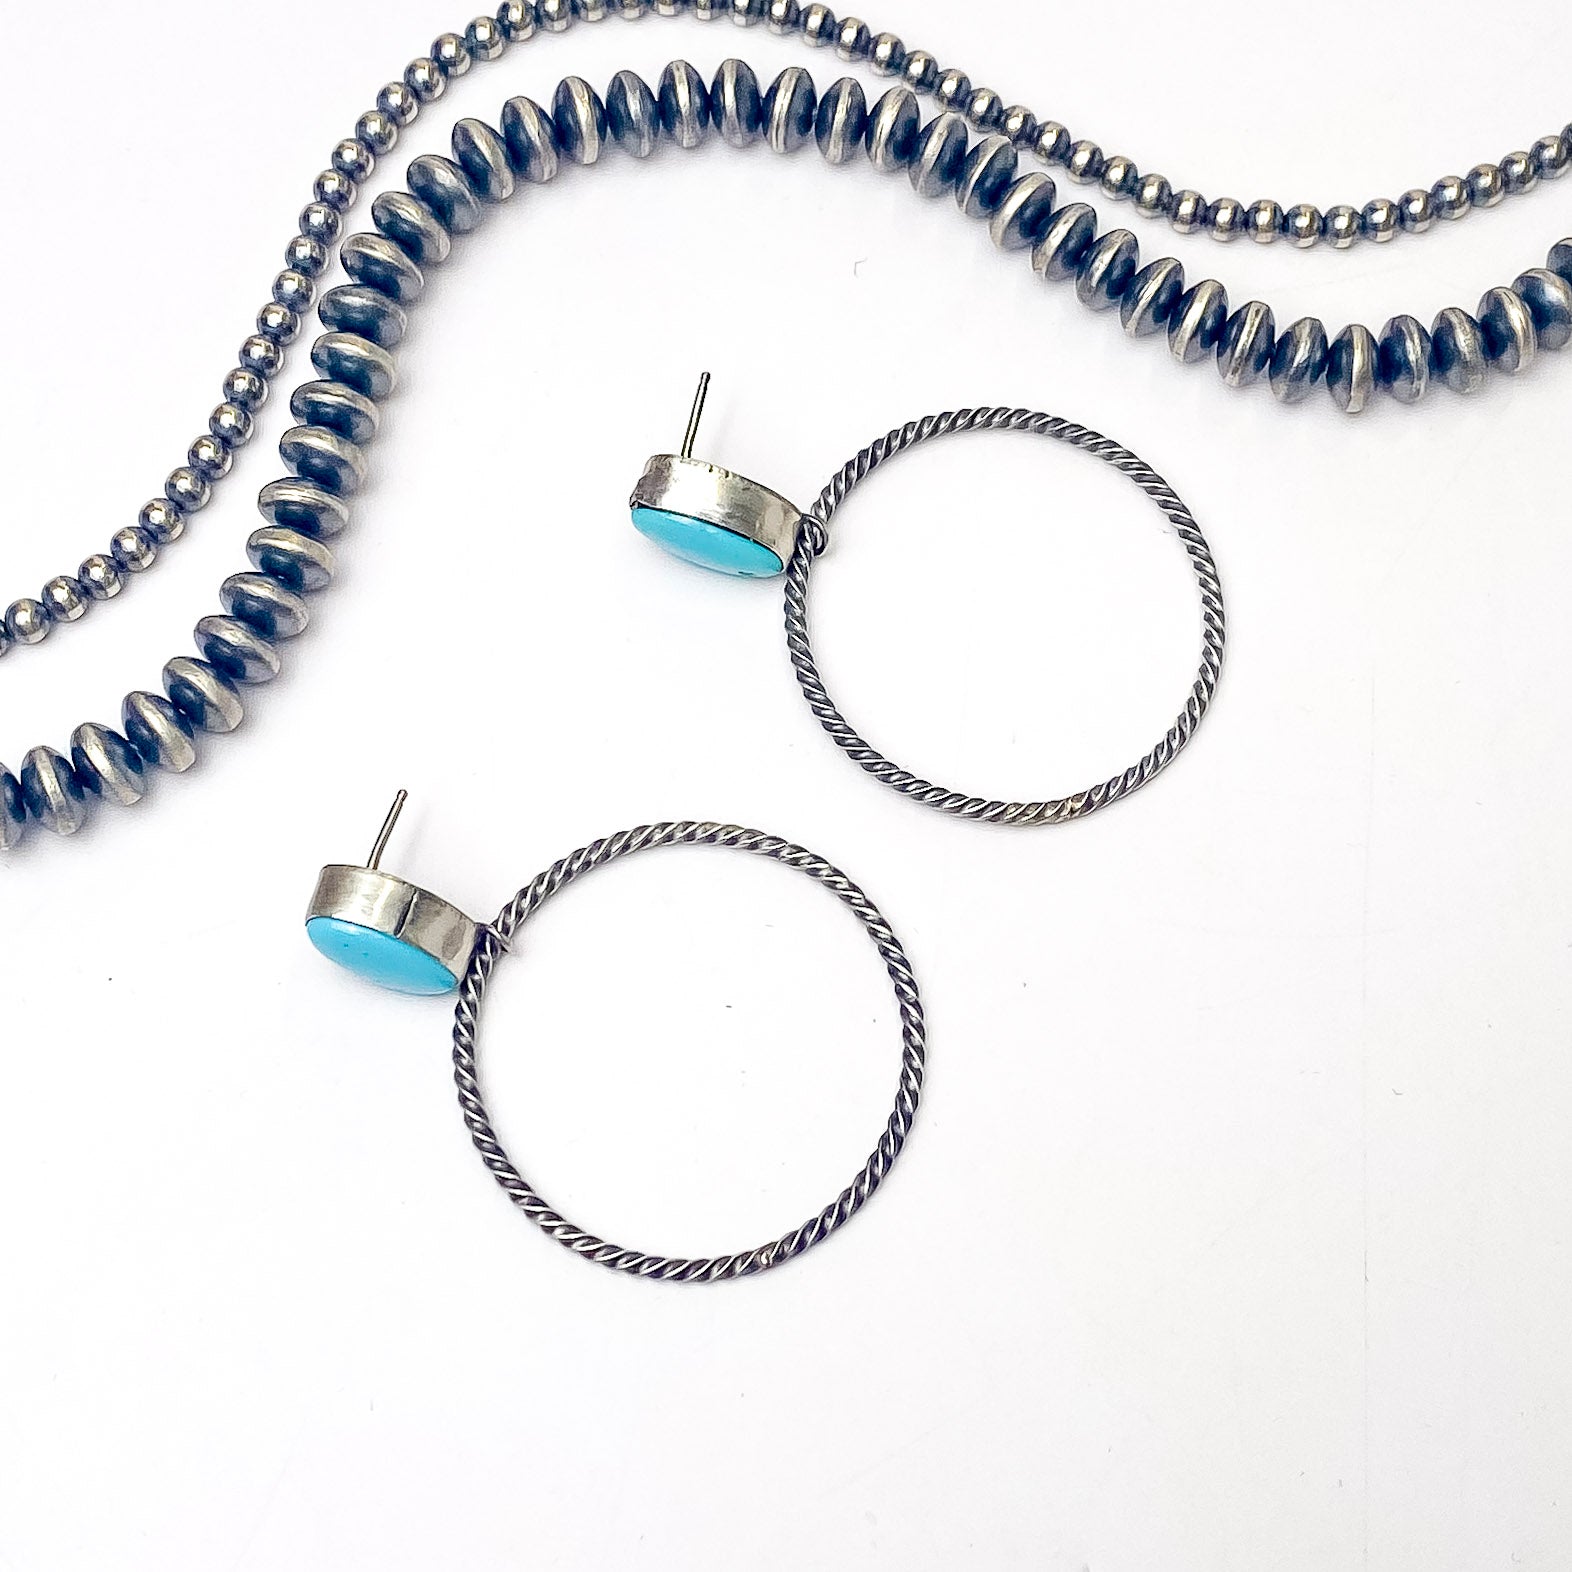 Tricia Smith | Navajo Handmade Rope Hoop Sterling Silver Earrings with Royston Turquoise Stones - Giddy Up Glamour Boutique